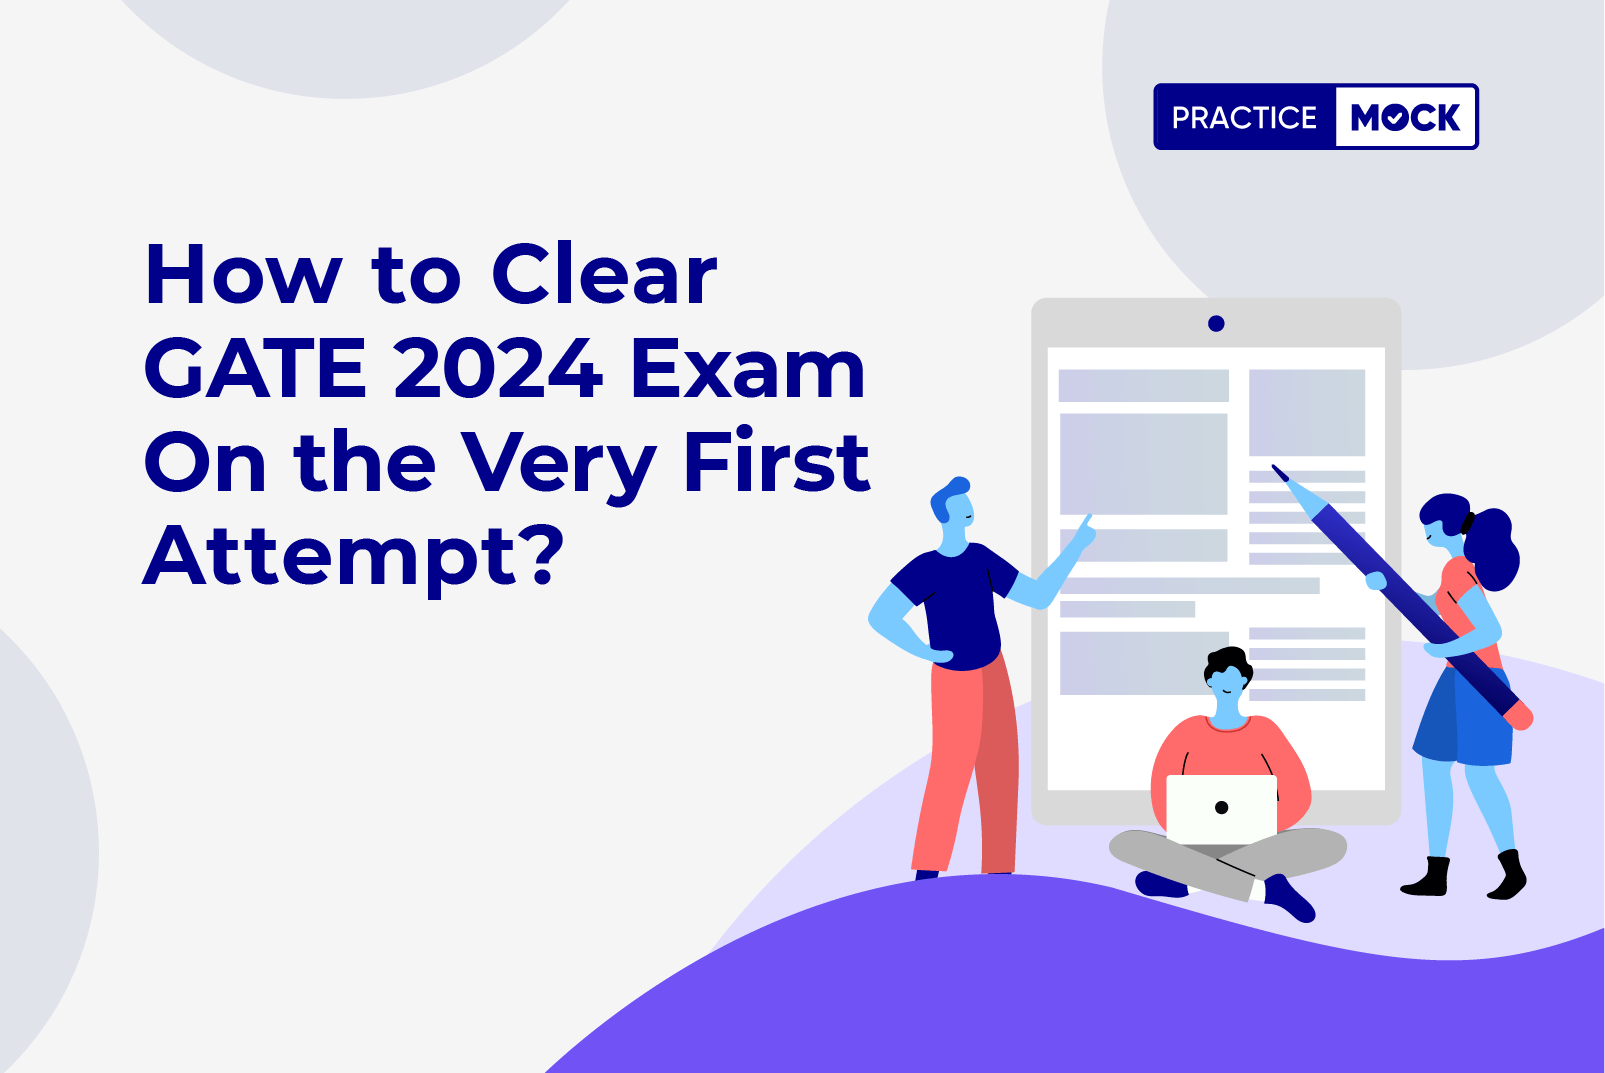 How to Clear GATE 2024 Exam On the Very First Attempt?